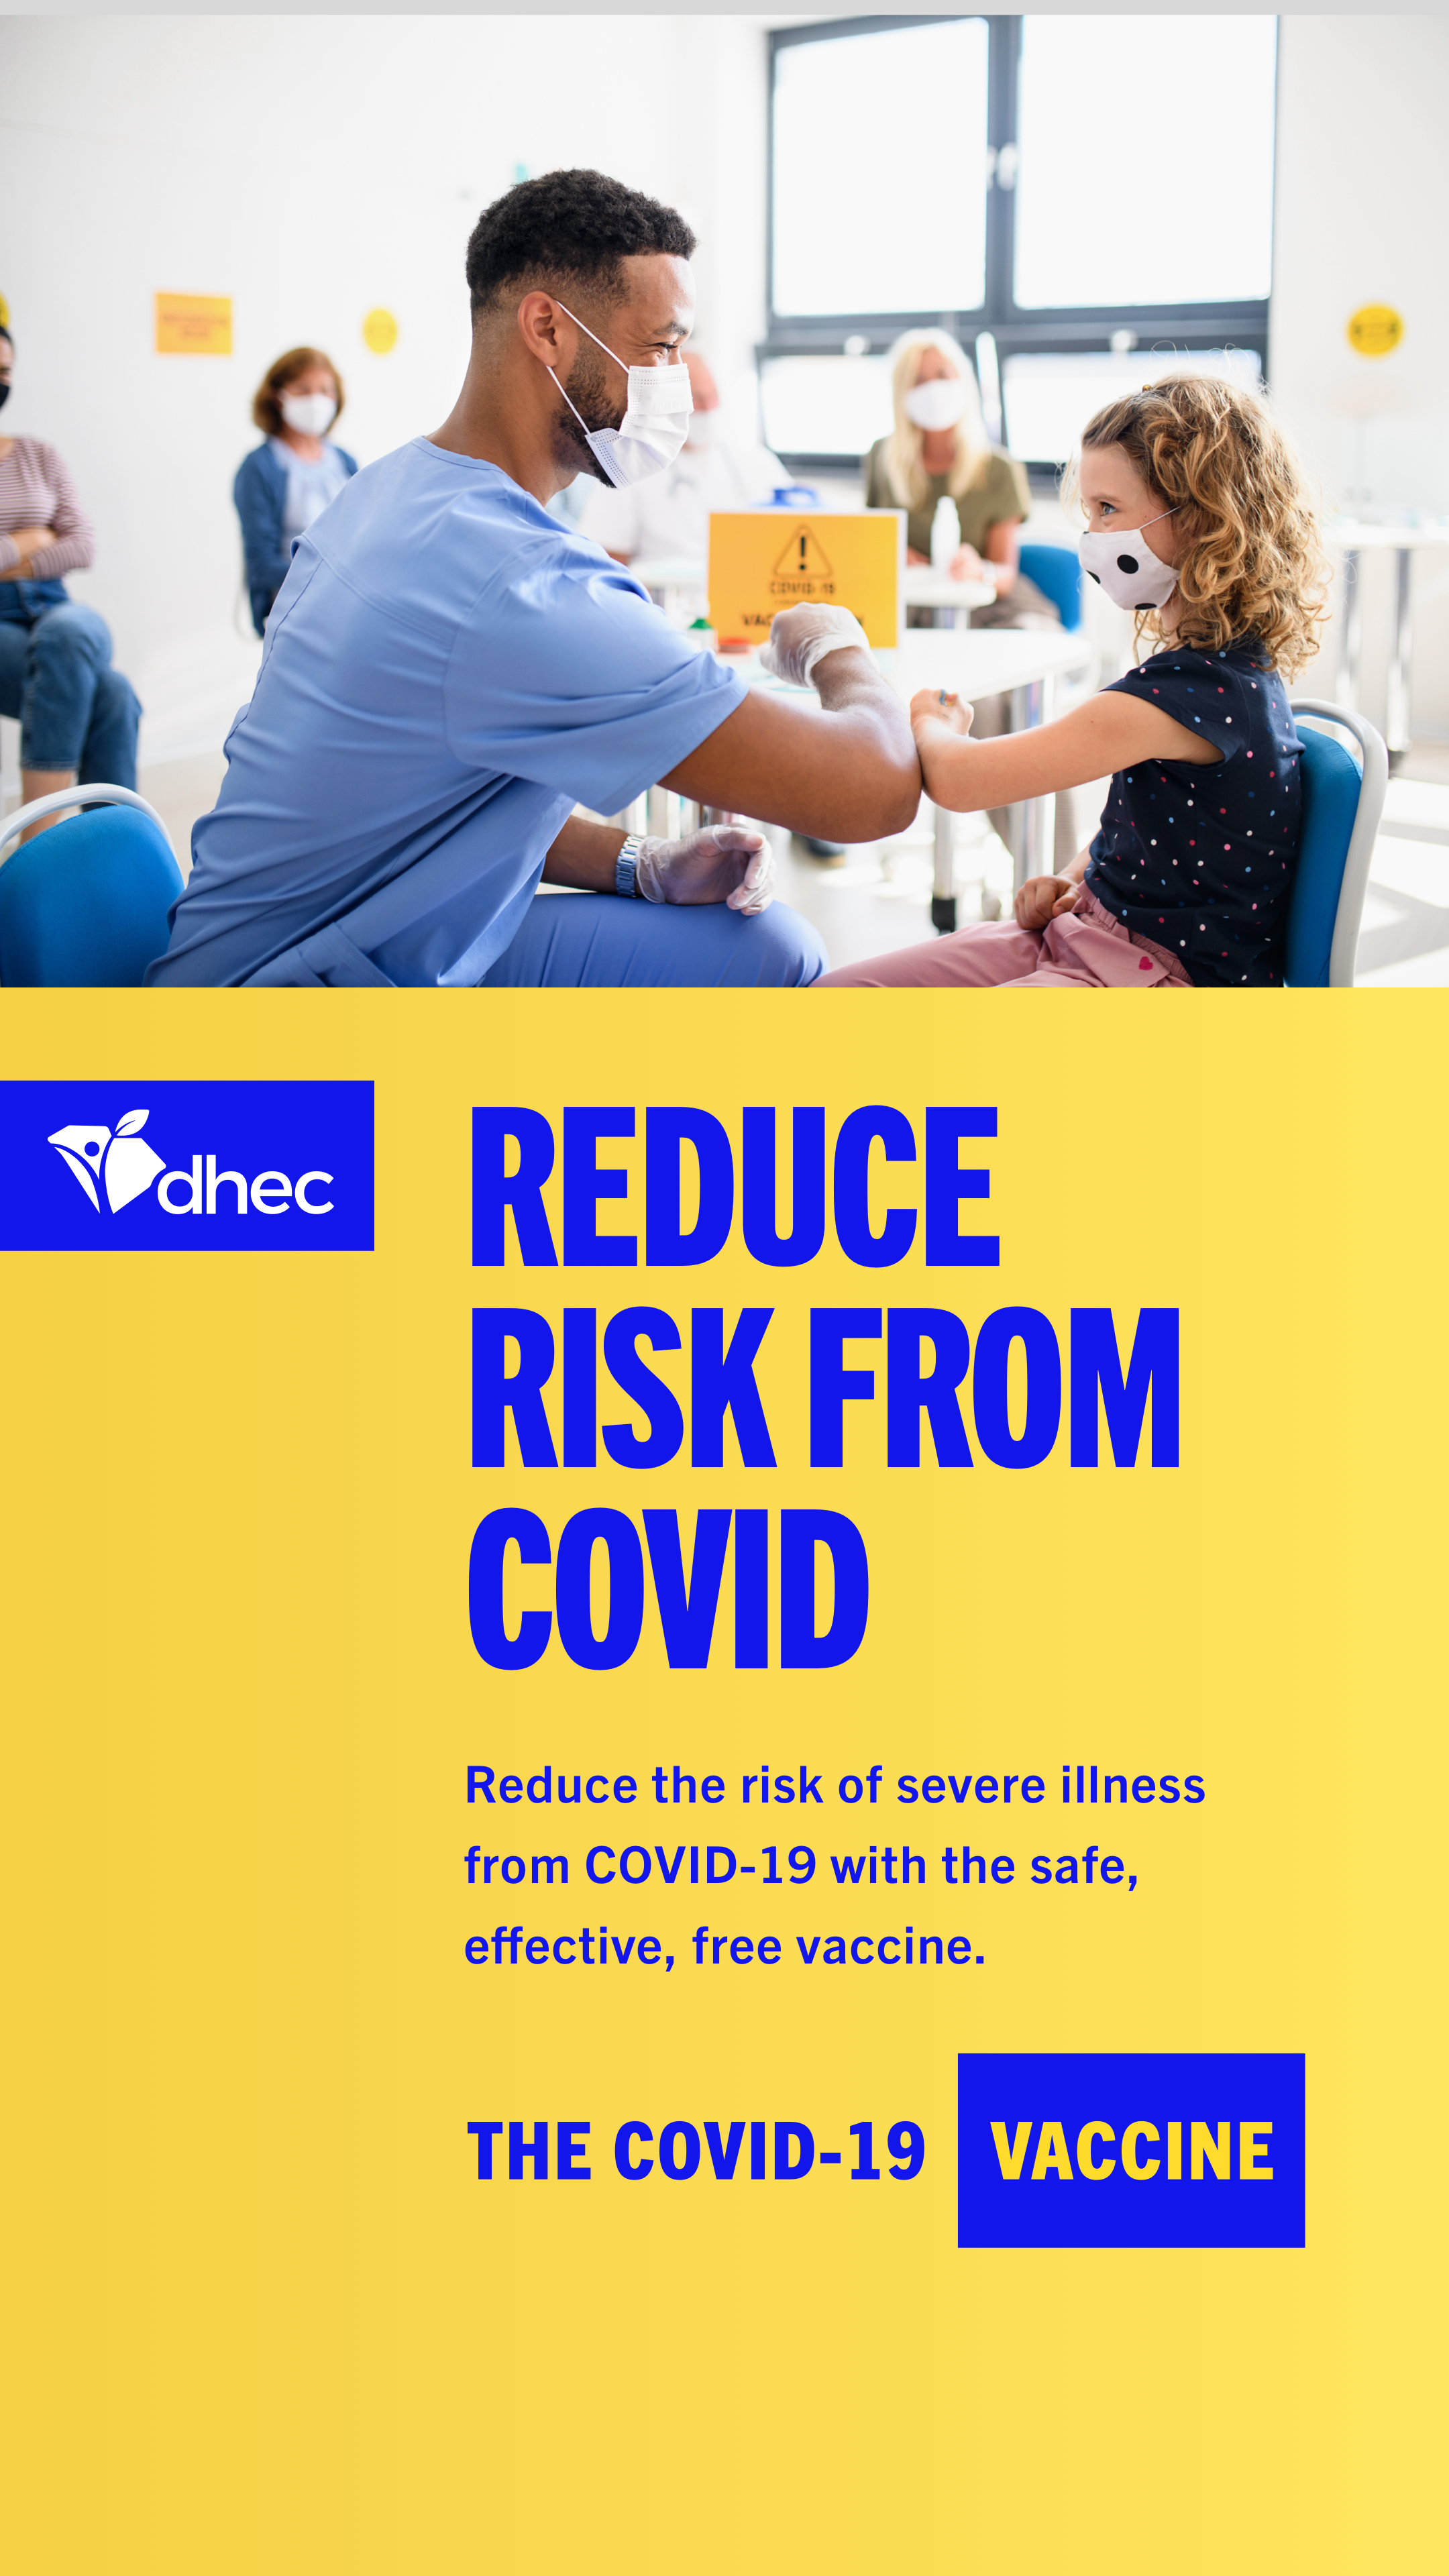 Reduce risk from COVID